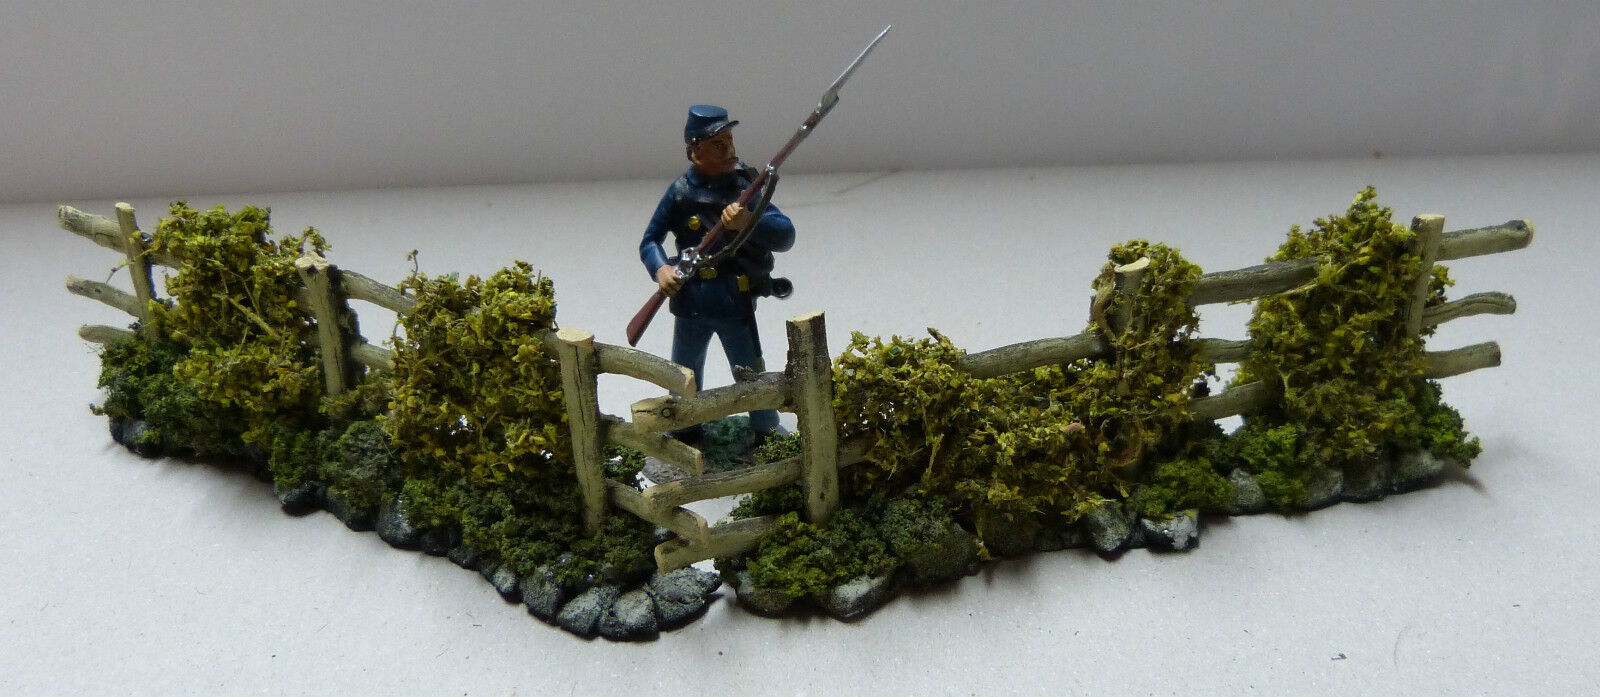 JG Miniatures Diorama Accessories, C14, Fence with Hedge, 1/32, 1/35, Hedge Sections